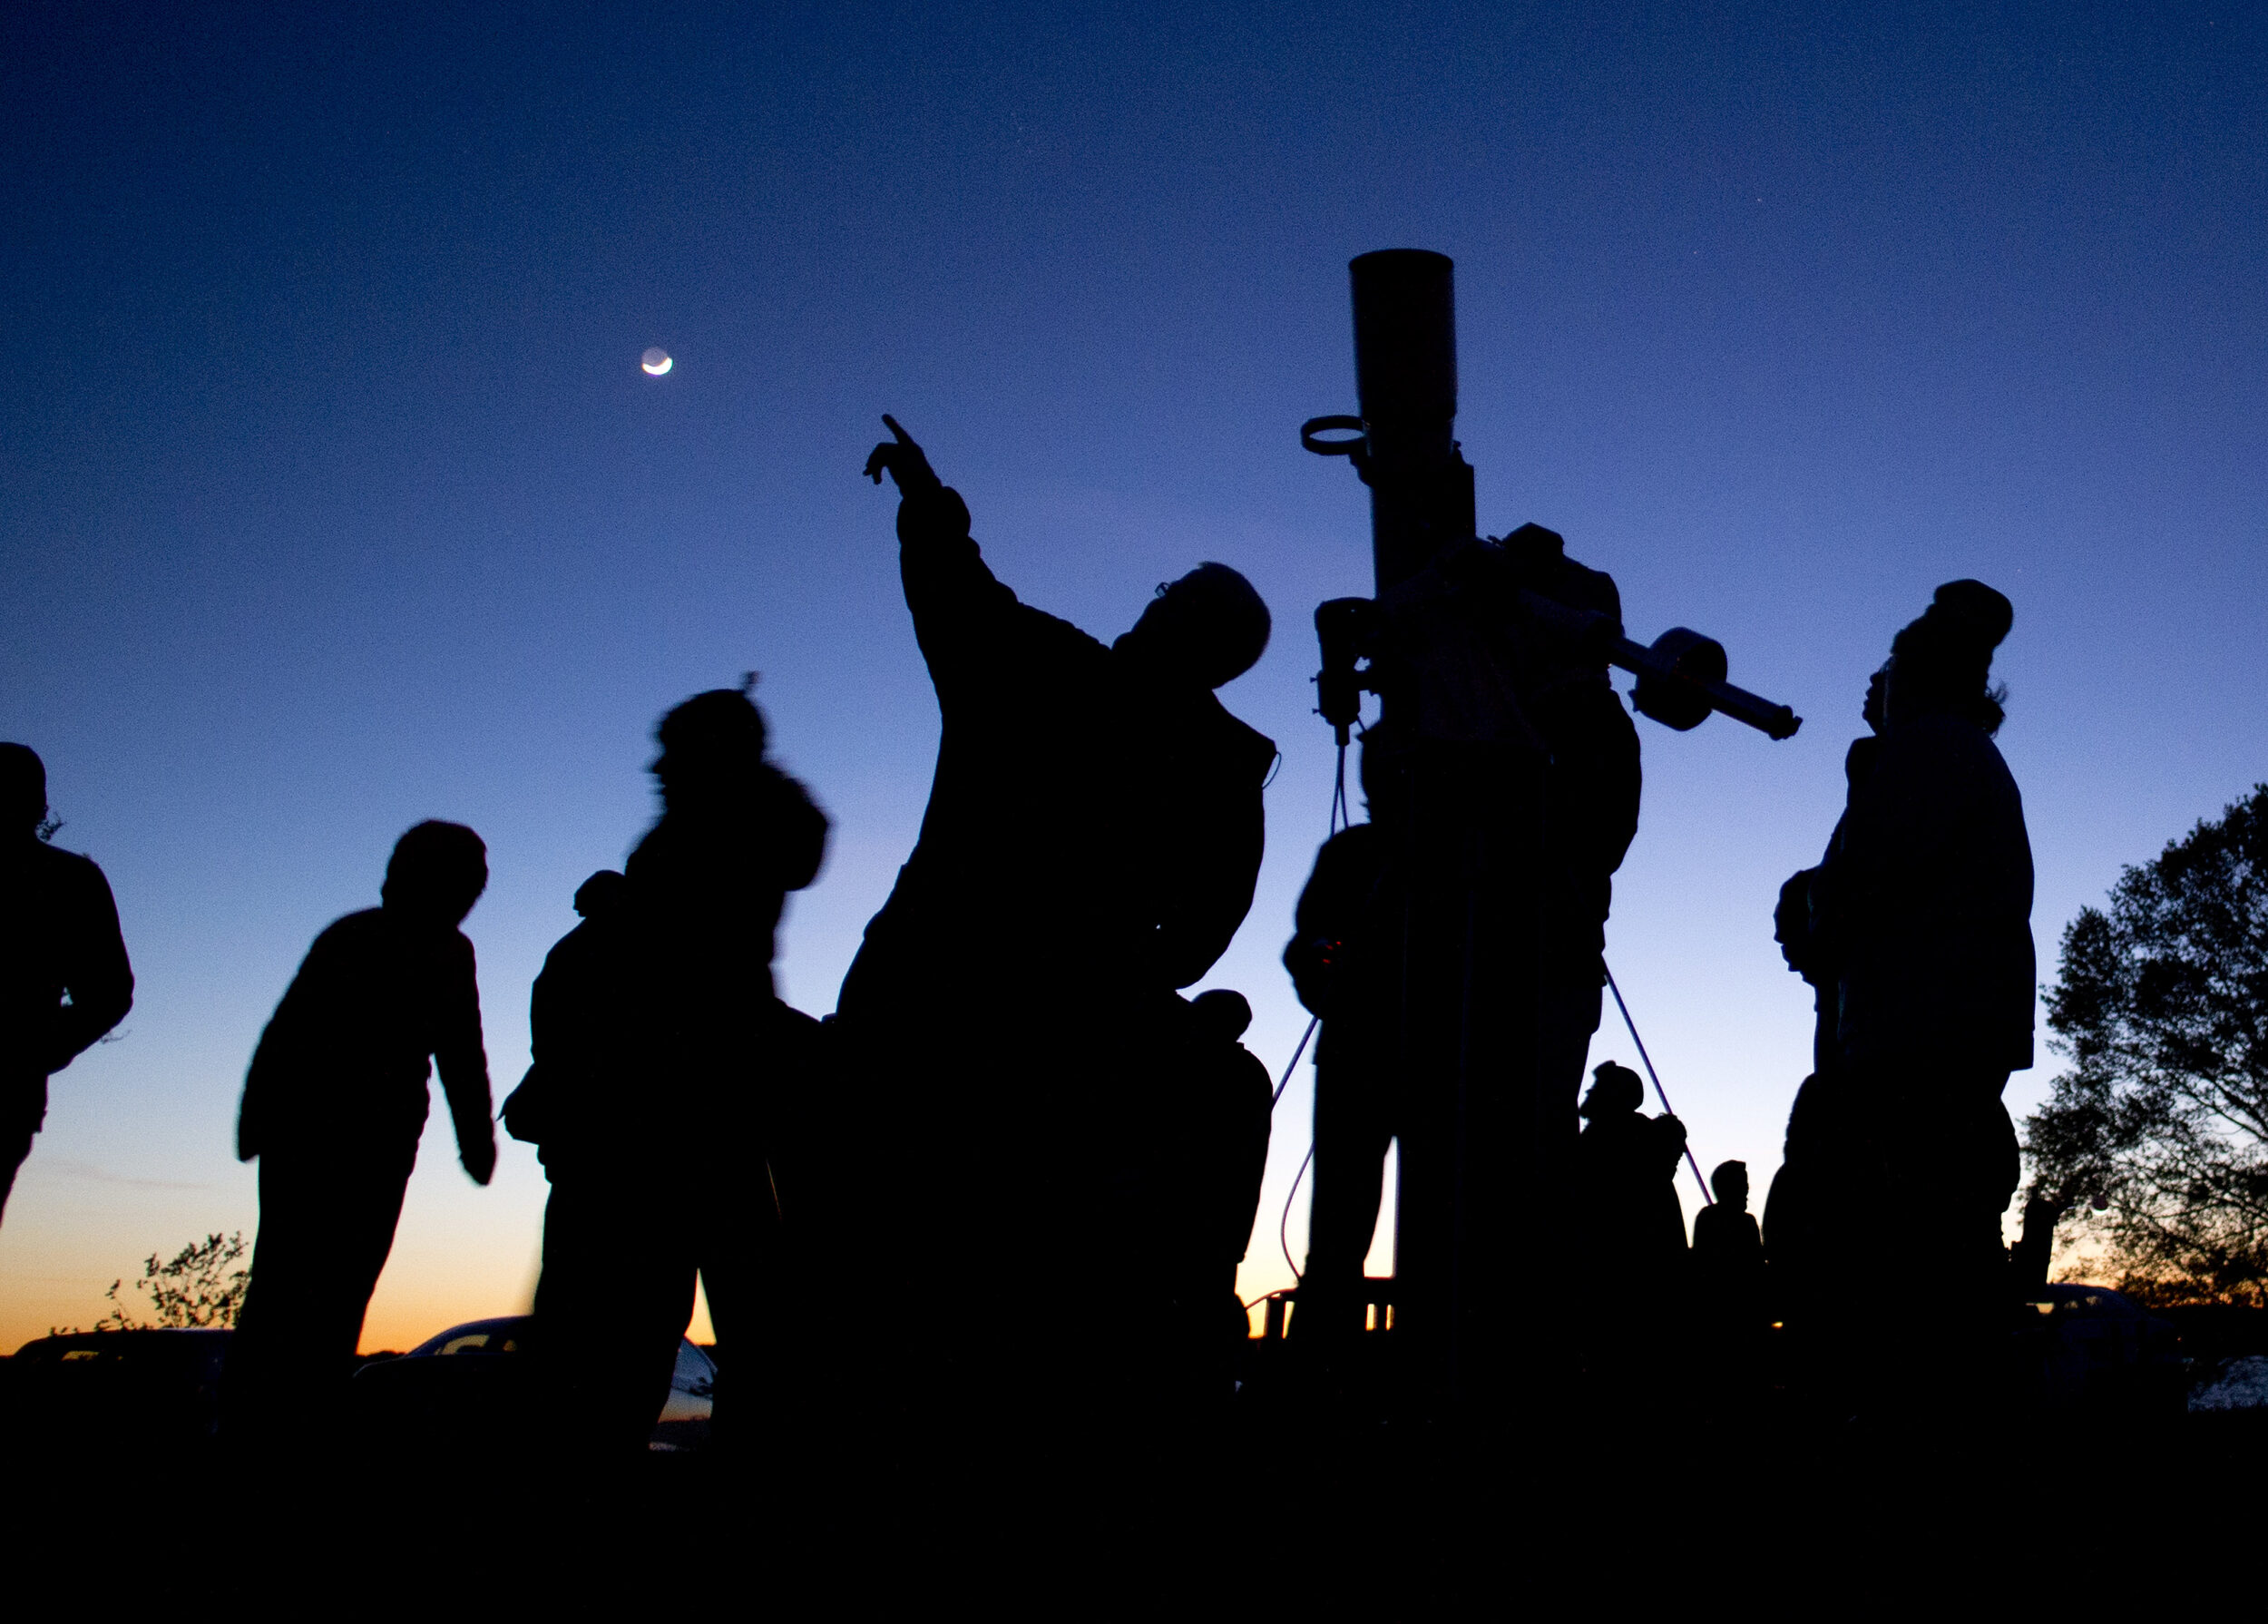 The silhouettes of a group of people standing outside and looking at a telescope. It is dark outside and the sun is setting.